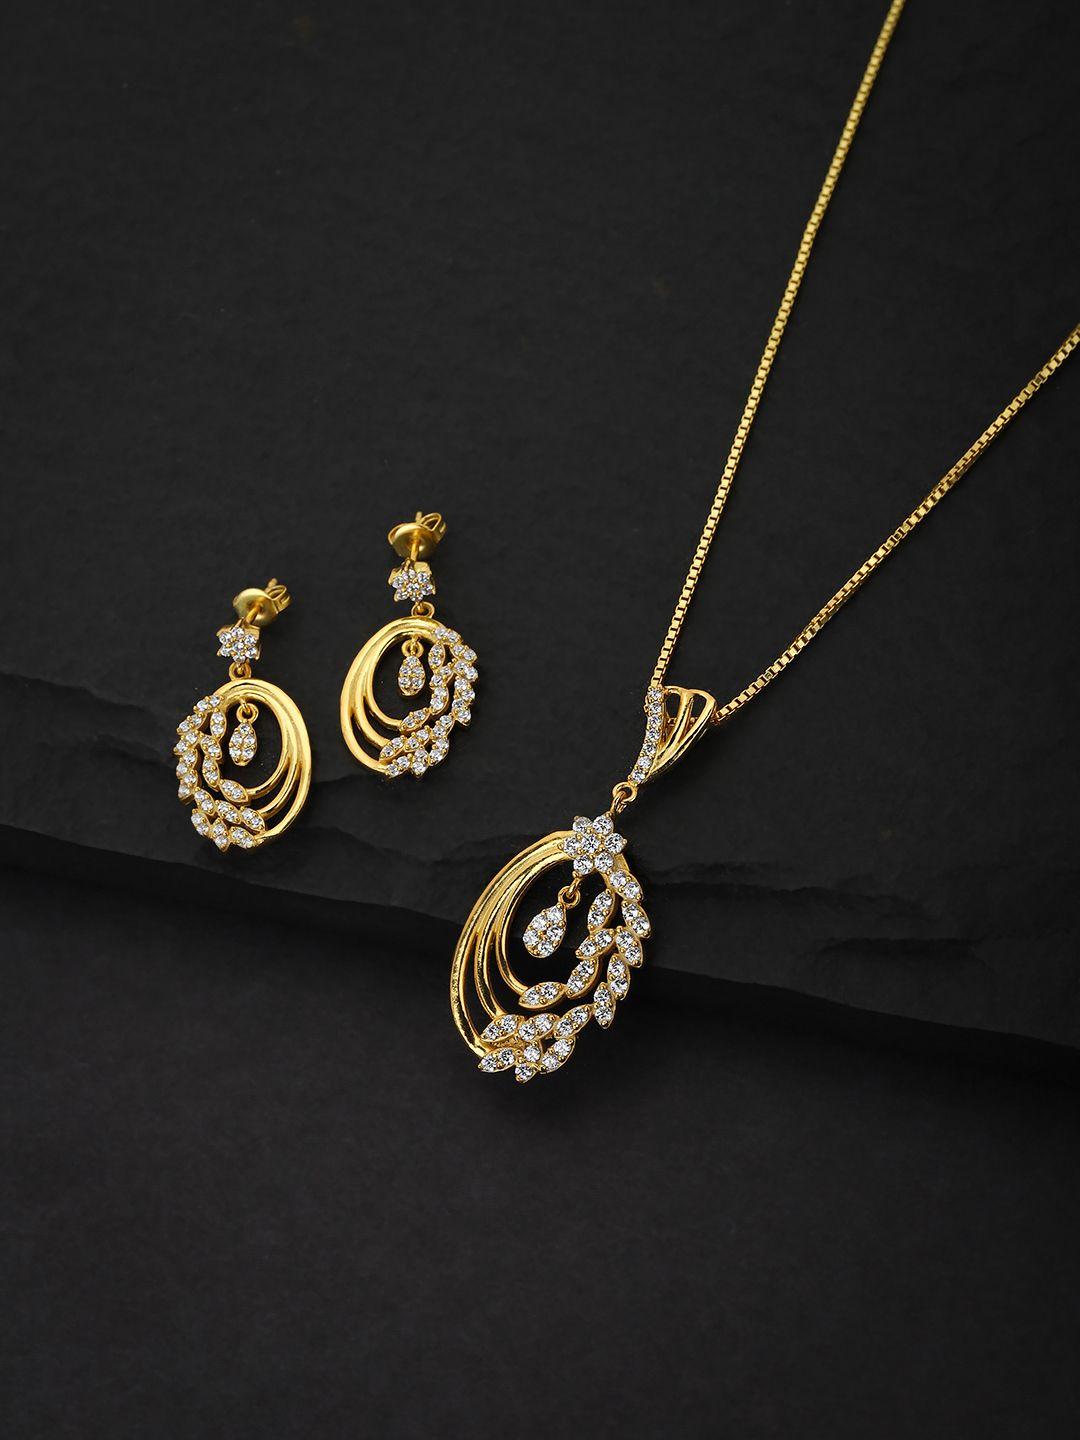 carlton-london-women-gold-toned-handcrafted-cubic-zirconia-studded-necklace-with-earrings